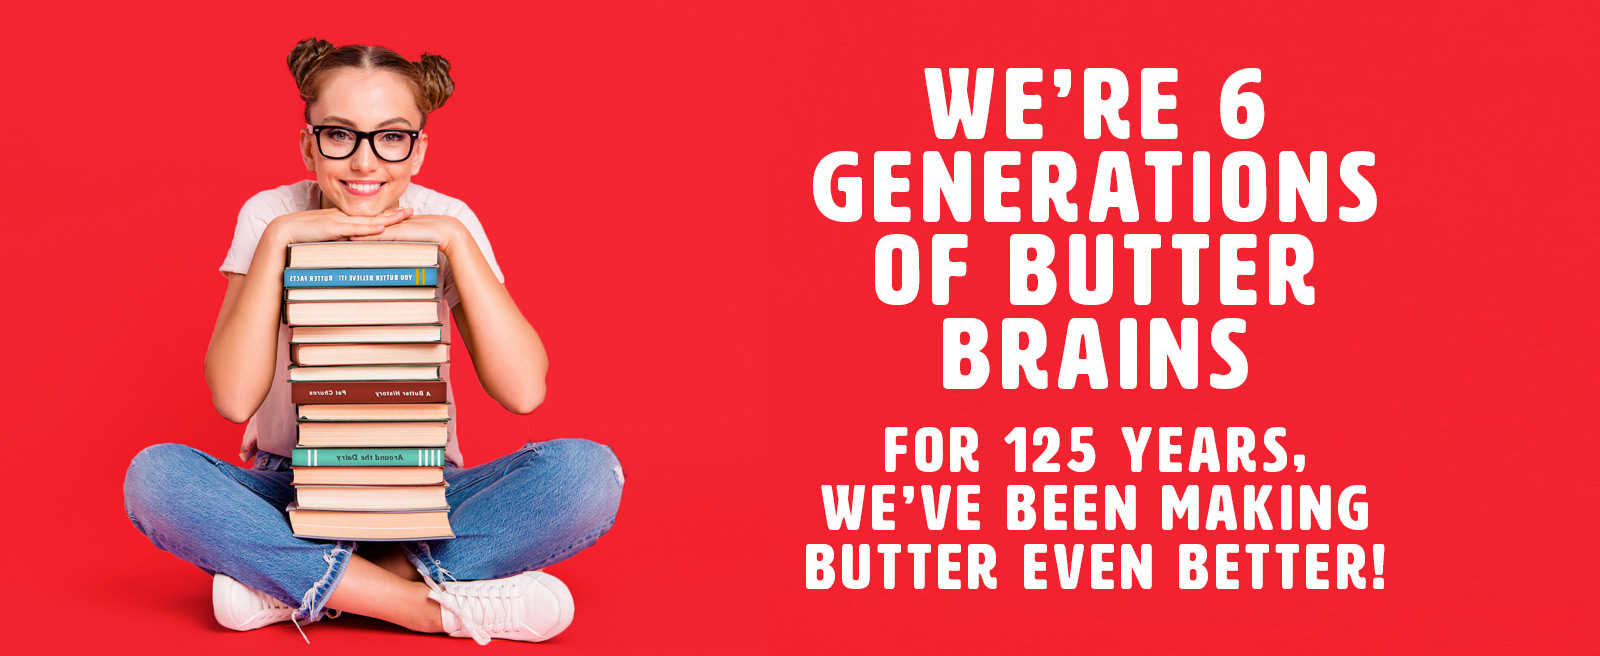 we're 6 generations of butter brains